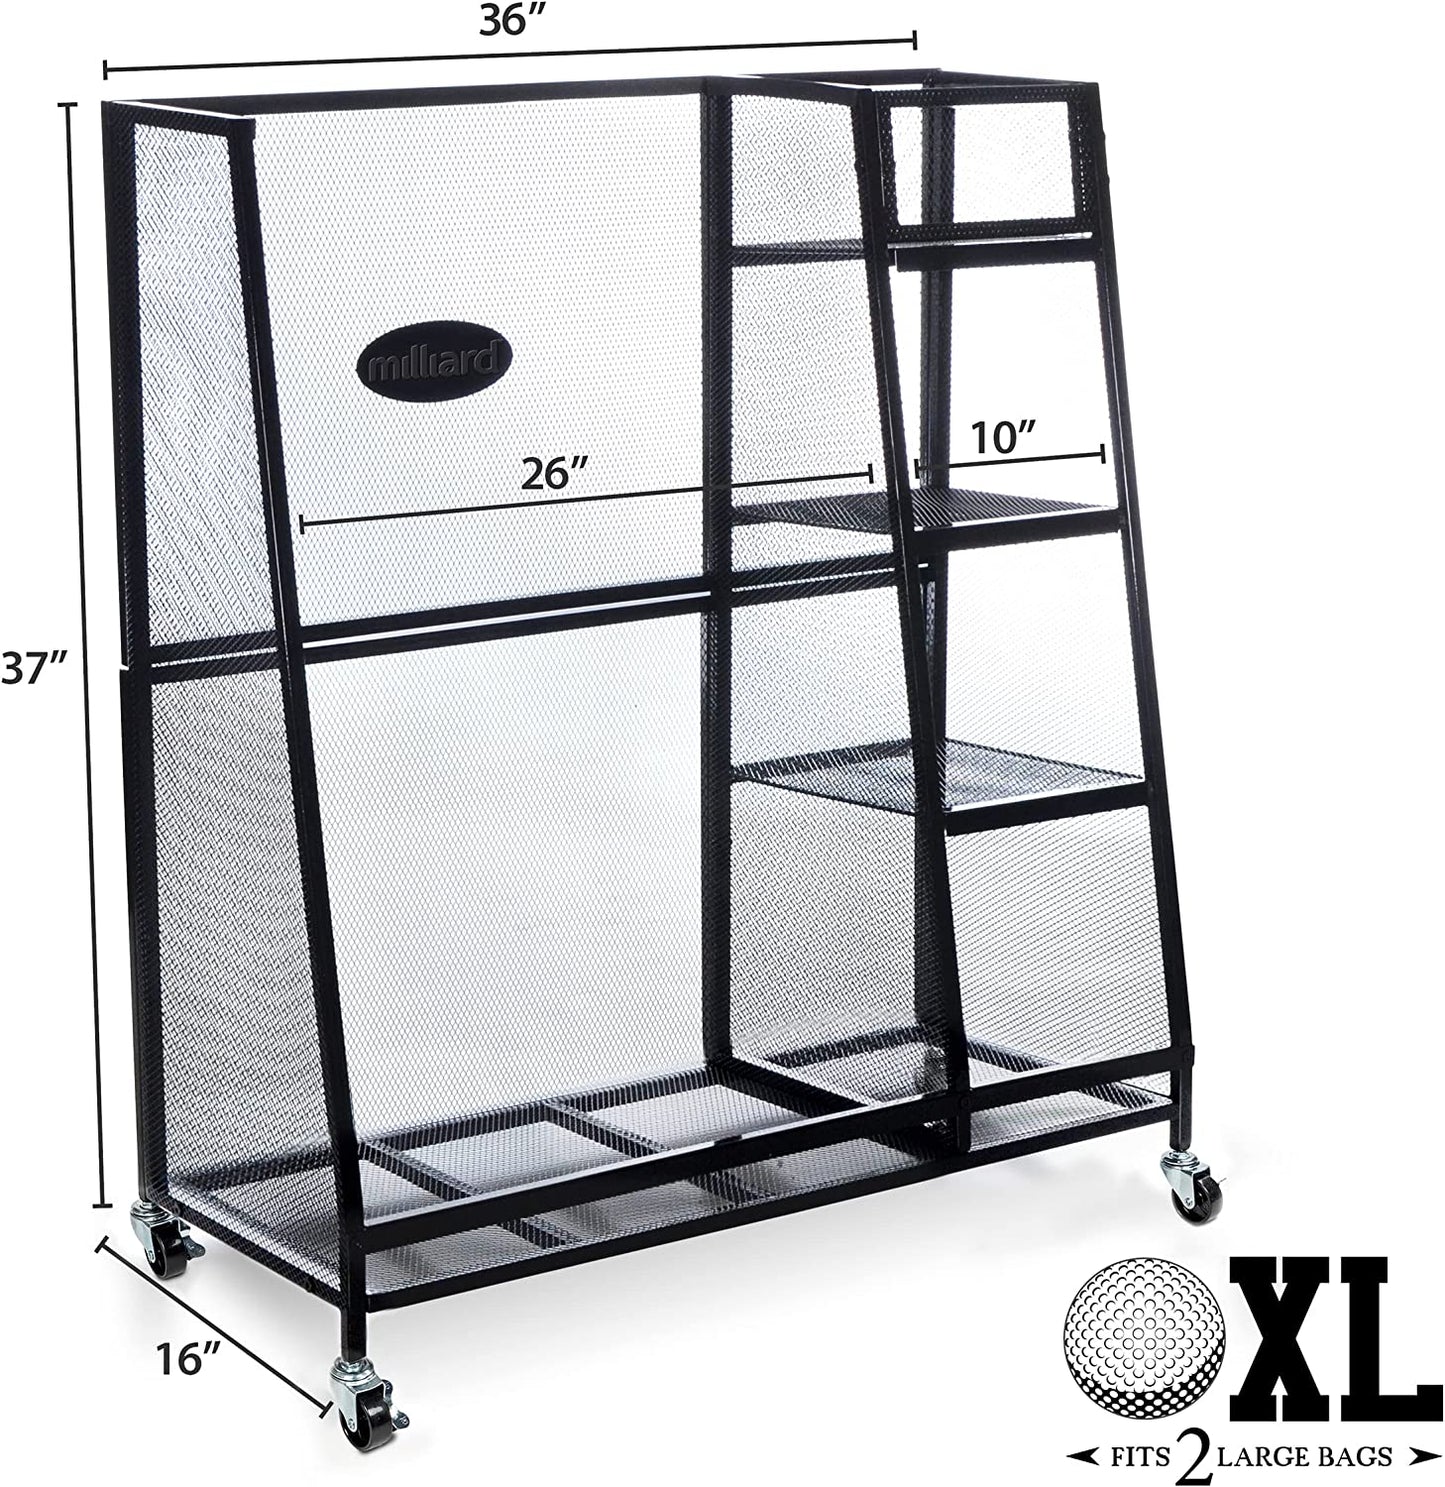 Size measurements for a golf storage rack organizer. The measurements are, 37 inches in height, 36 inches width and 16 inches deep.